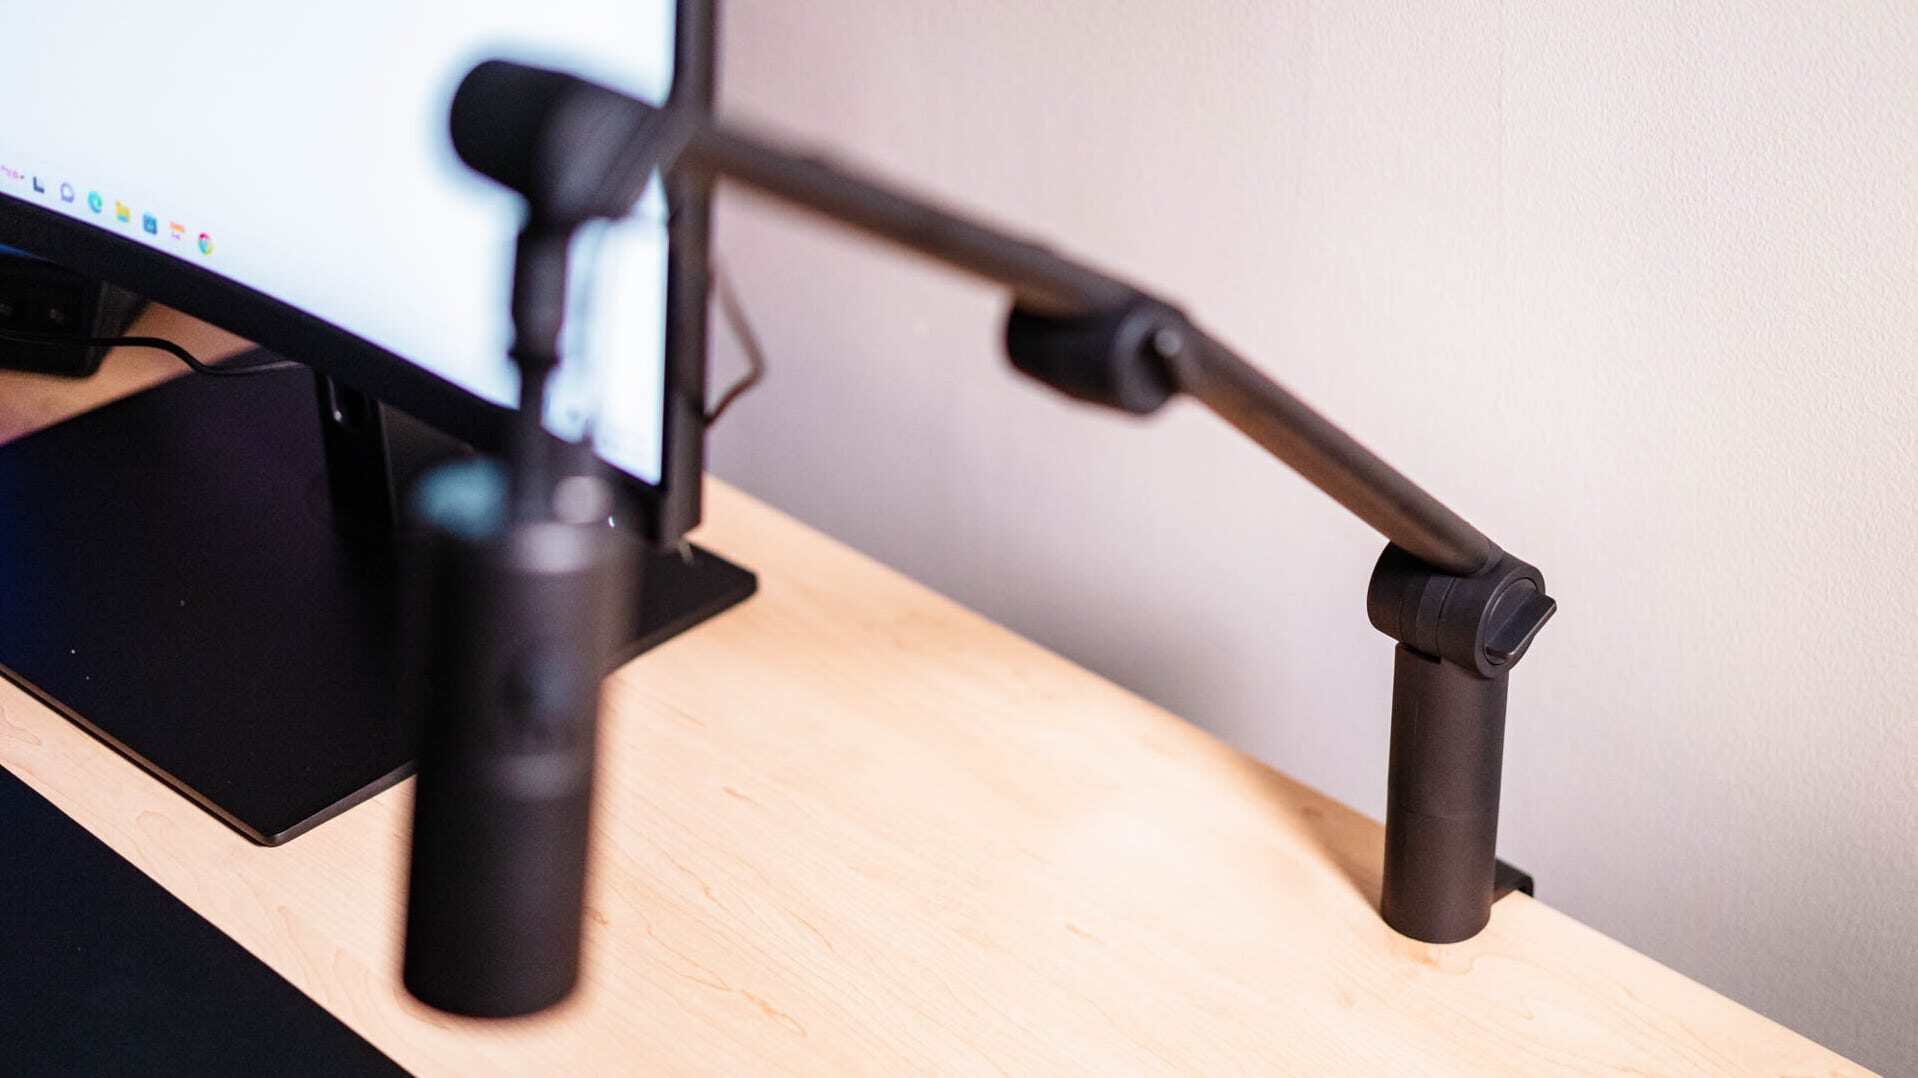 nzxt-capsule-mini-boom-arm-clamp-attached-to-a-desk-1502431